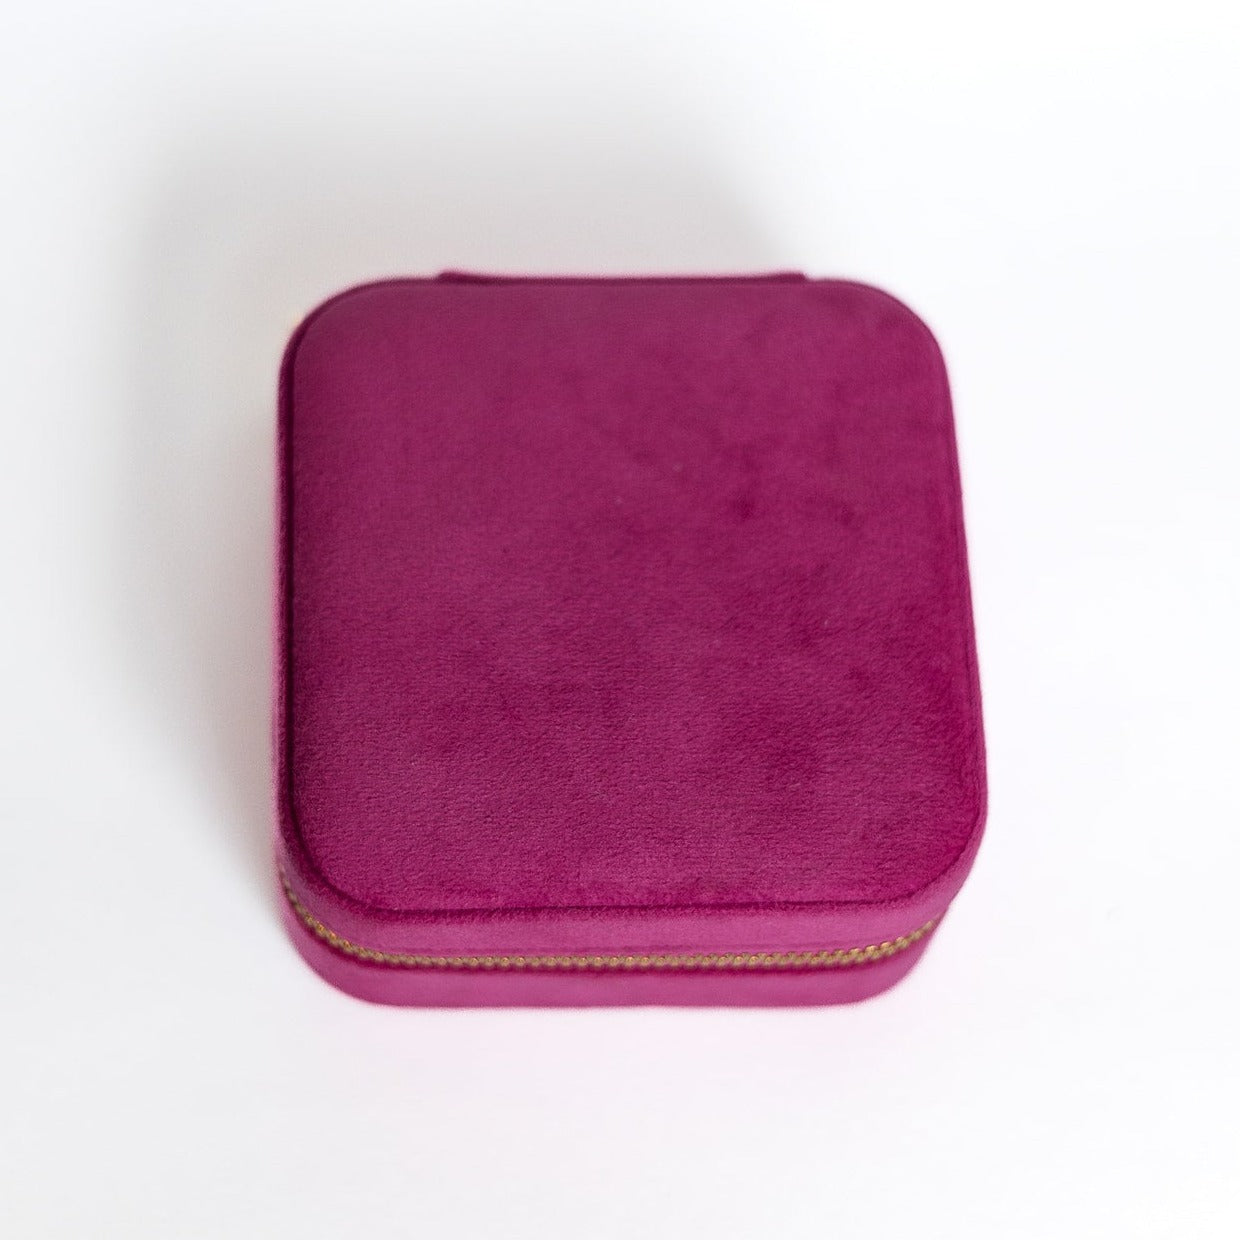 The outside of a fuchsia jewelry case.